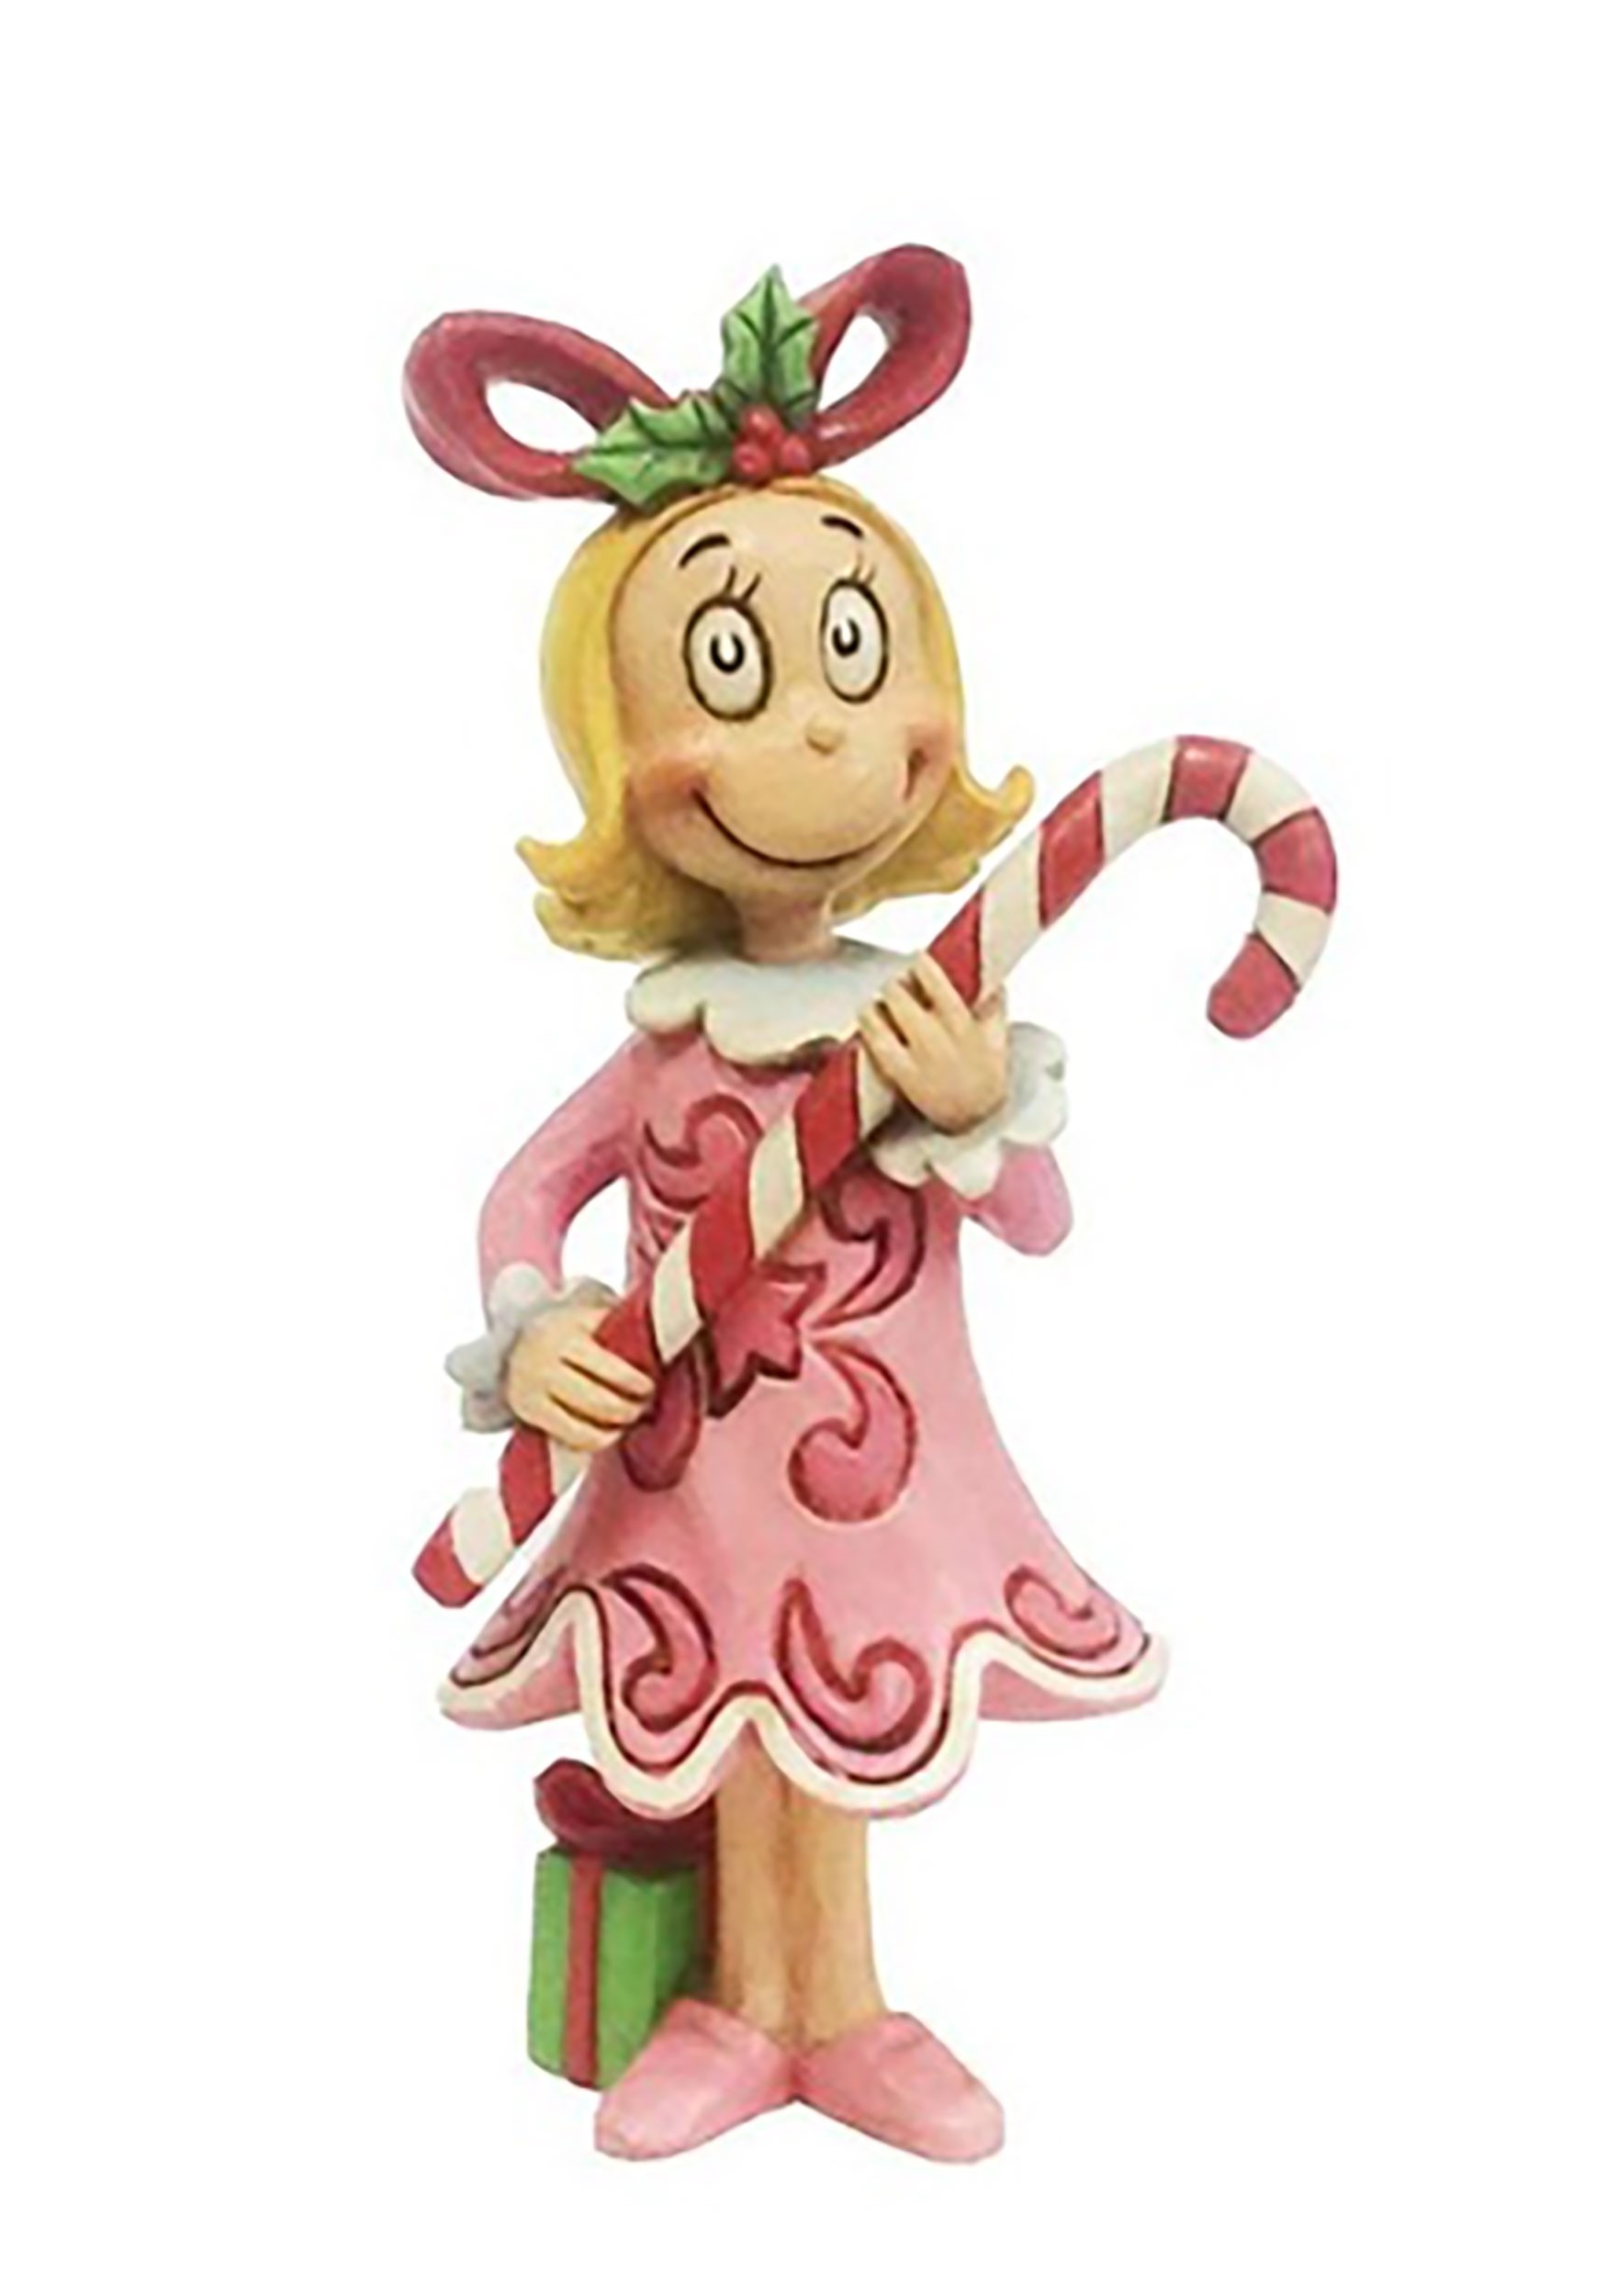 Figurine Grinch who stole Christmas Cindy Lou Who Candy Cane NEW with gift box